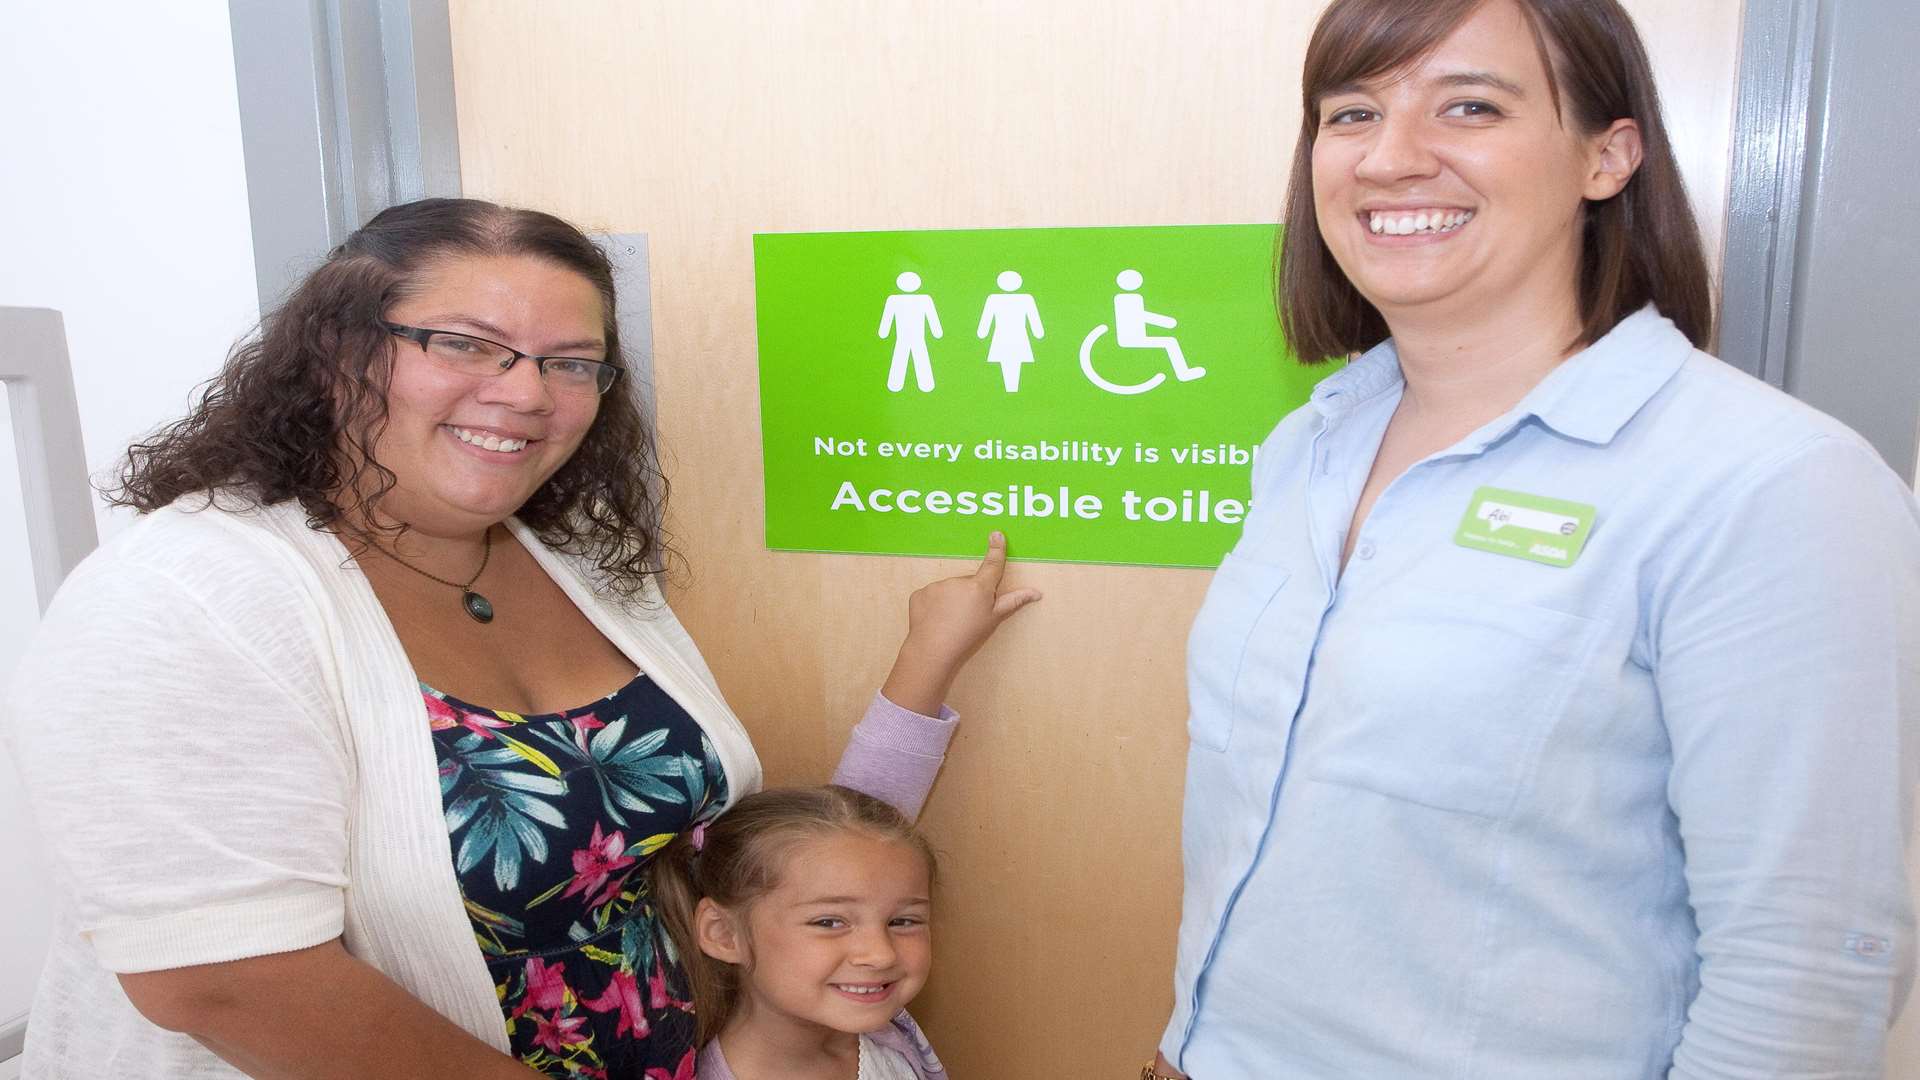 Tonya Glennester was visiting the store with her daughter, Evalynn who has autism and was questioned by another customer about why they used the disabled toilet.